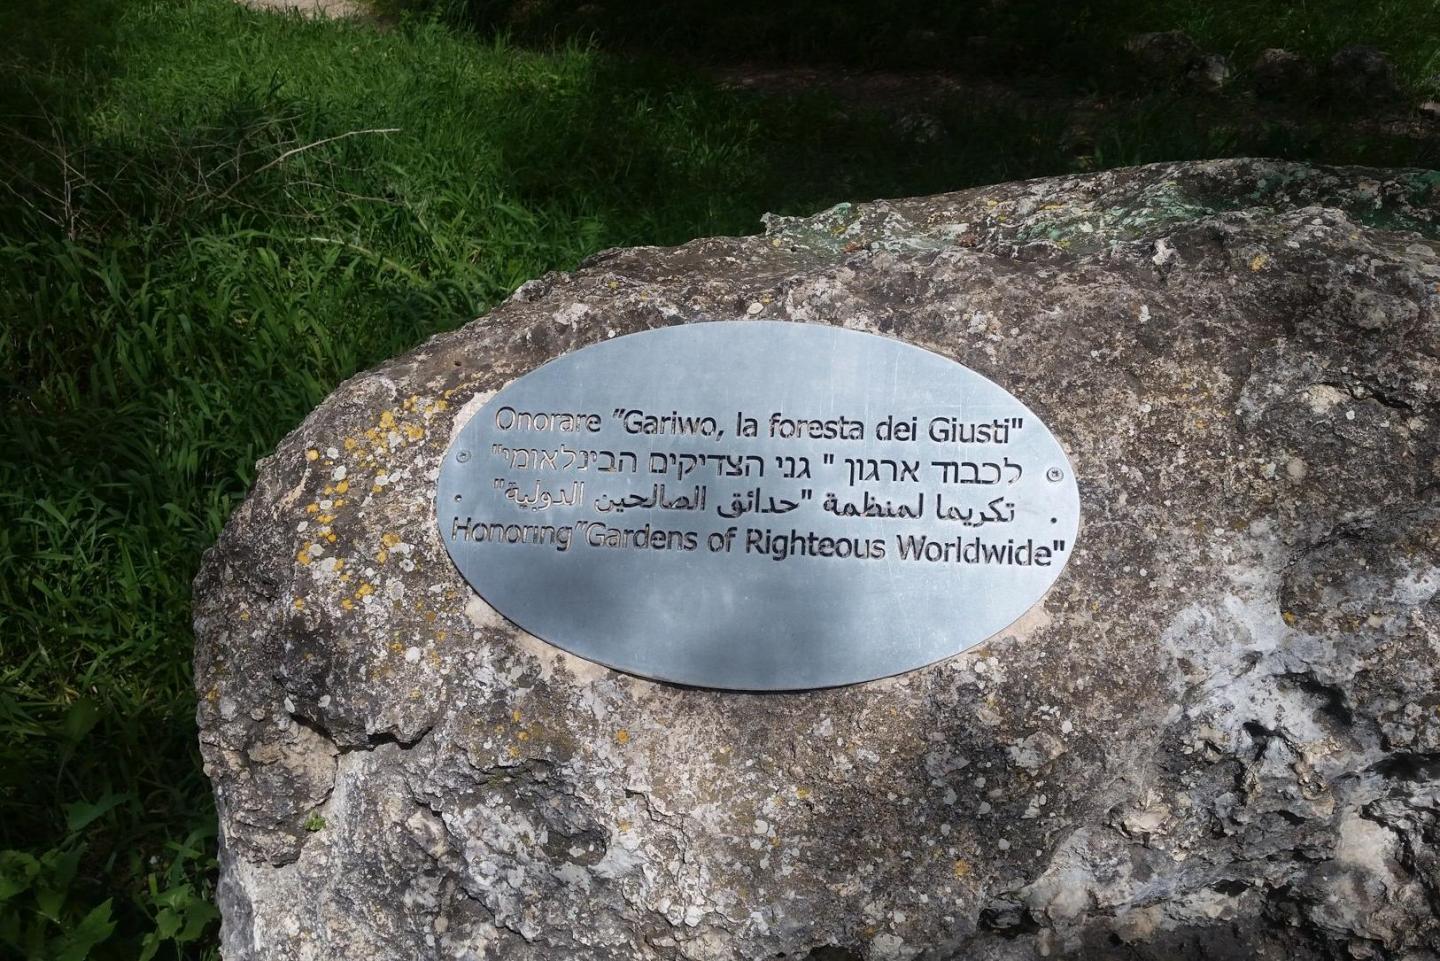 the plaque dedicated to Gariwo